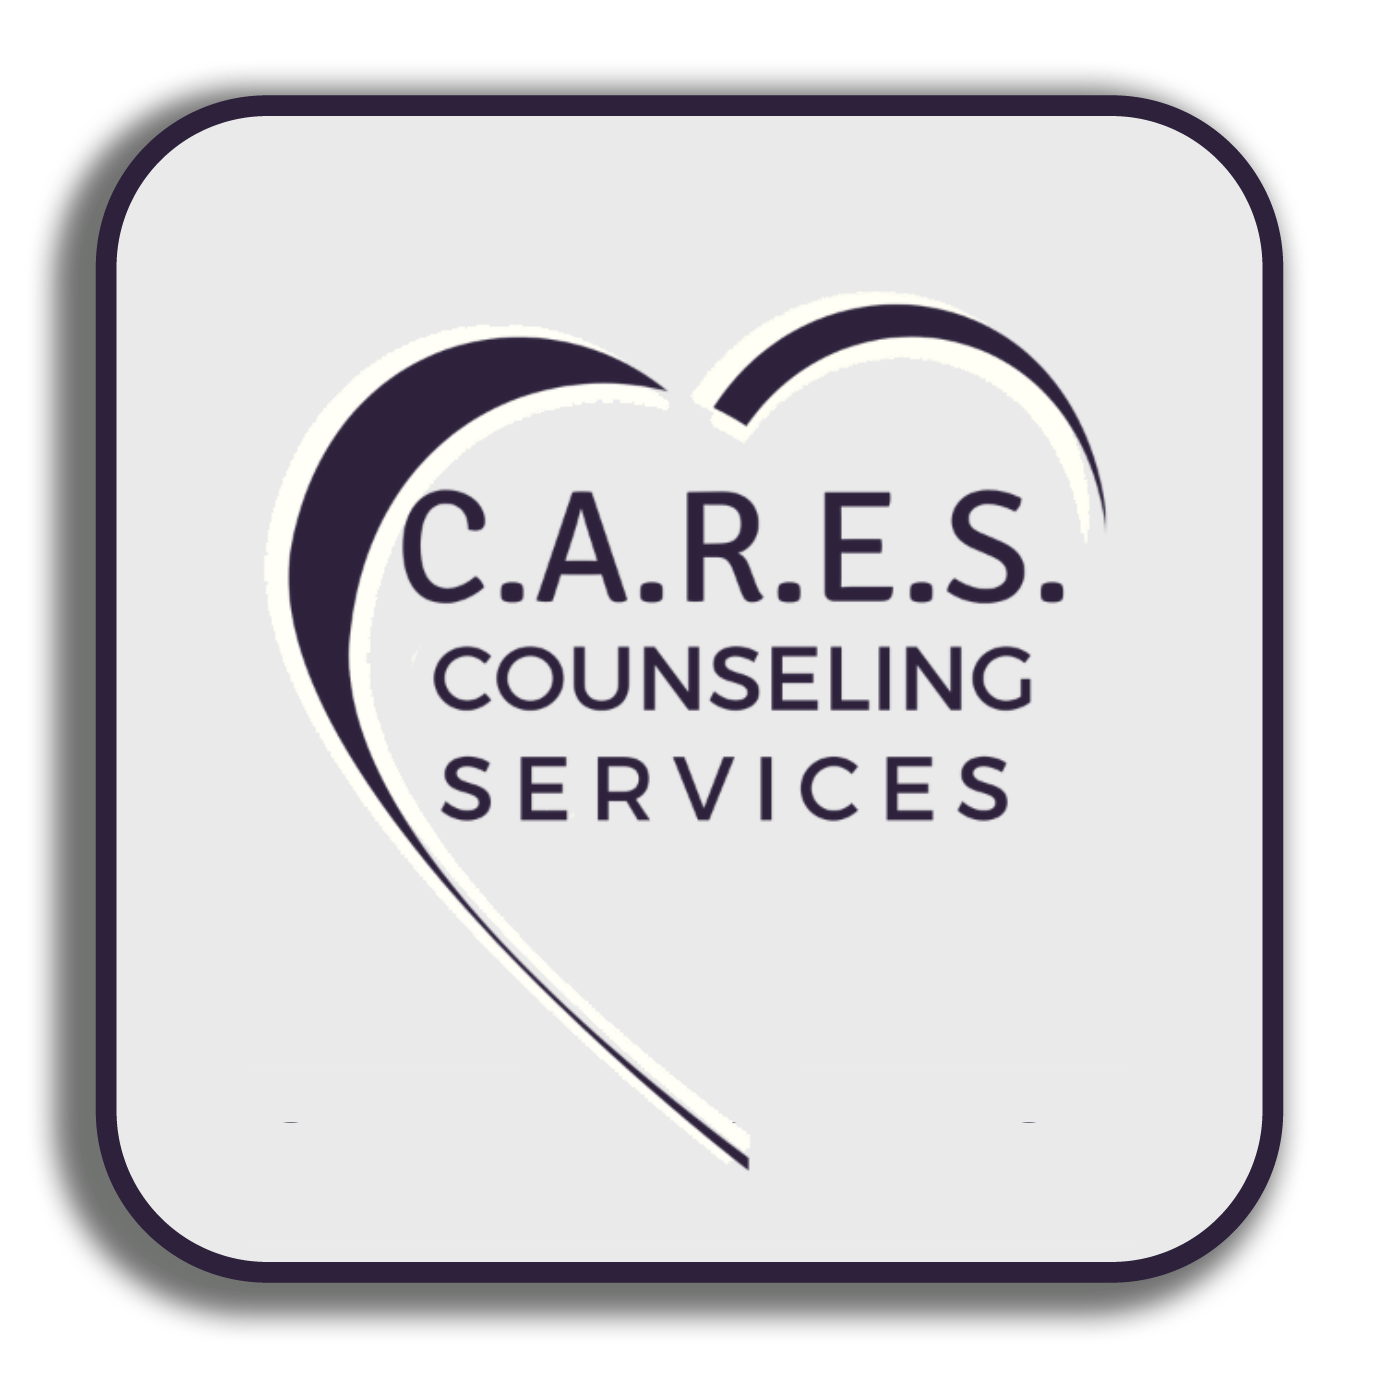 C.A.R.E.S. Counseling Services